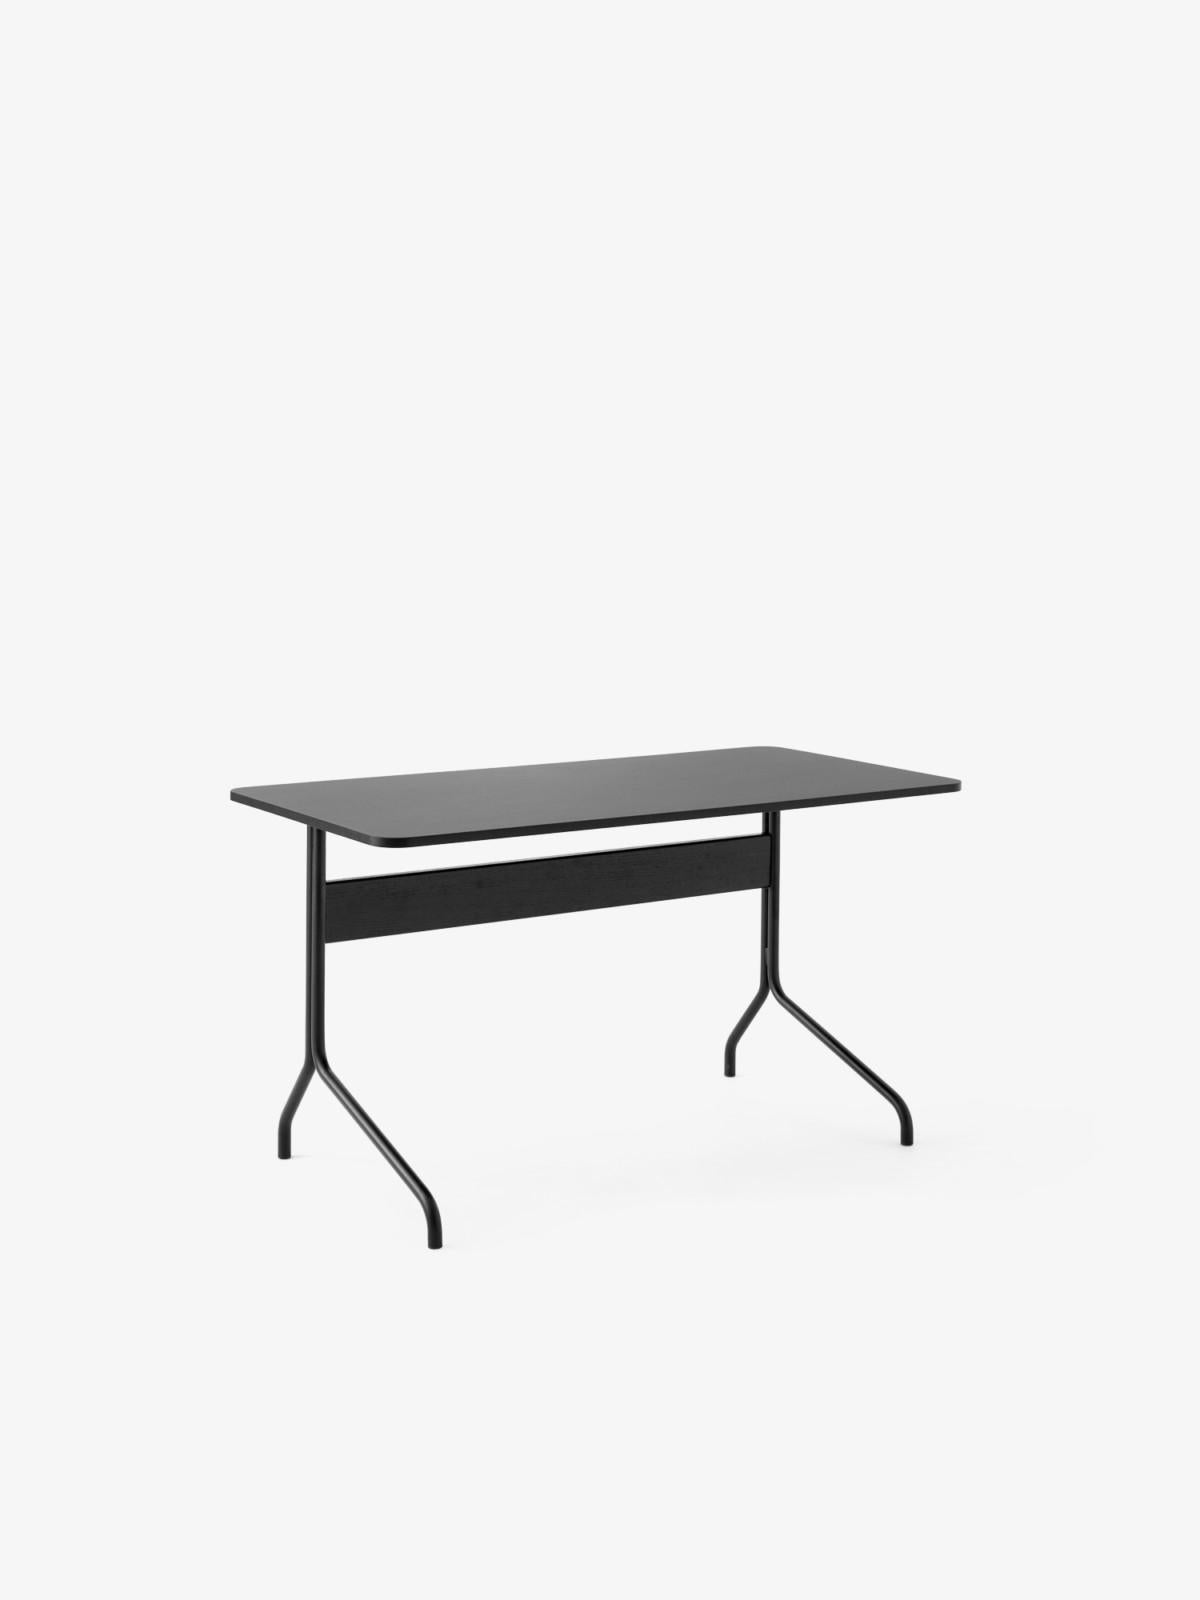 A light and lyrical aesthetic compact desk intended to suit both office and home spaces. 
The Pavilion desk is made of a tabletop laminated with linoleum and veneered edges. 
The legs are made from bent steel tubes.

Tabletop finishes
Black